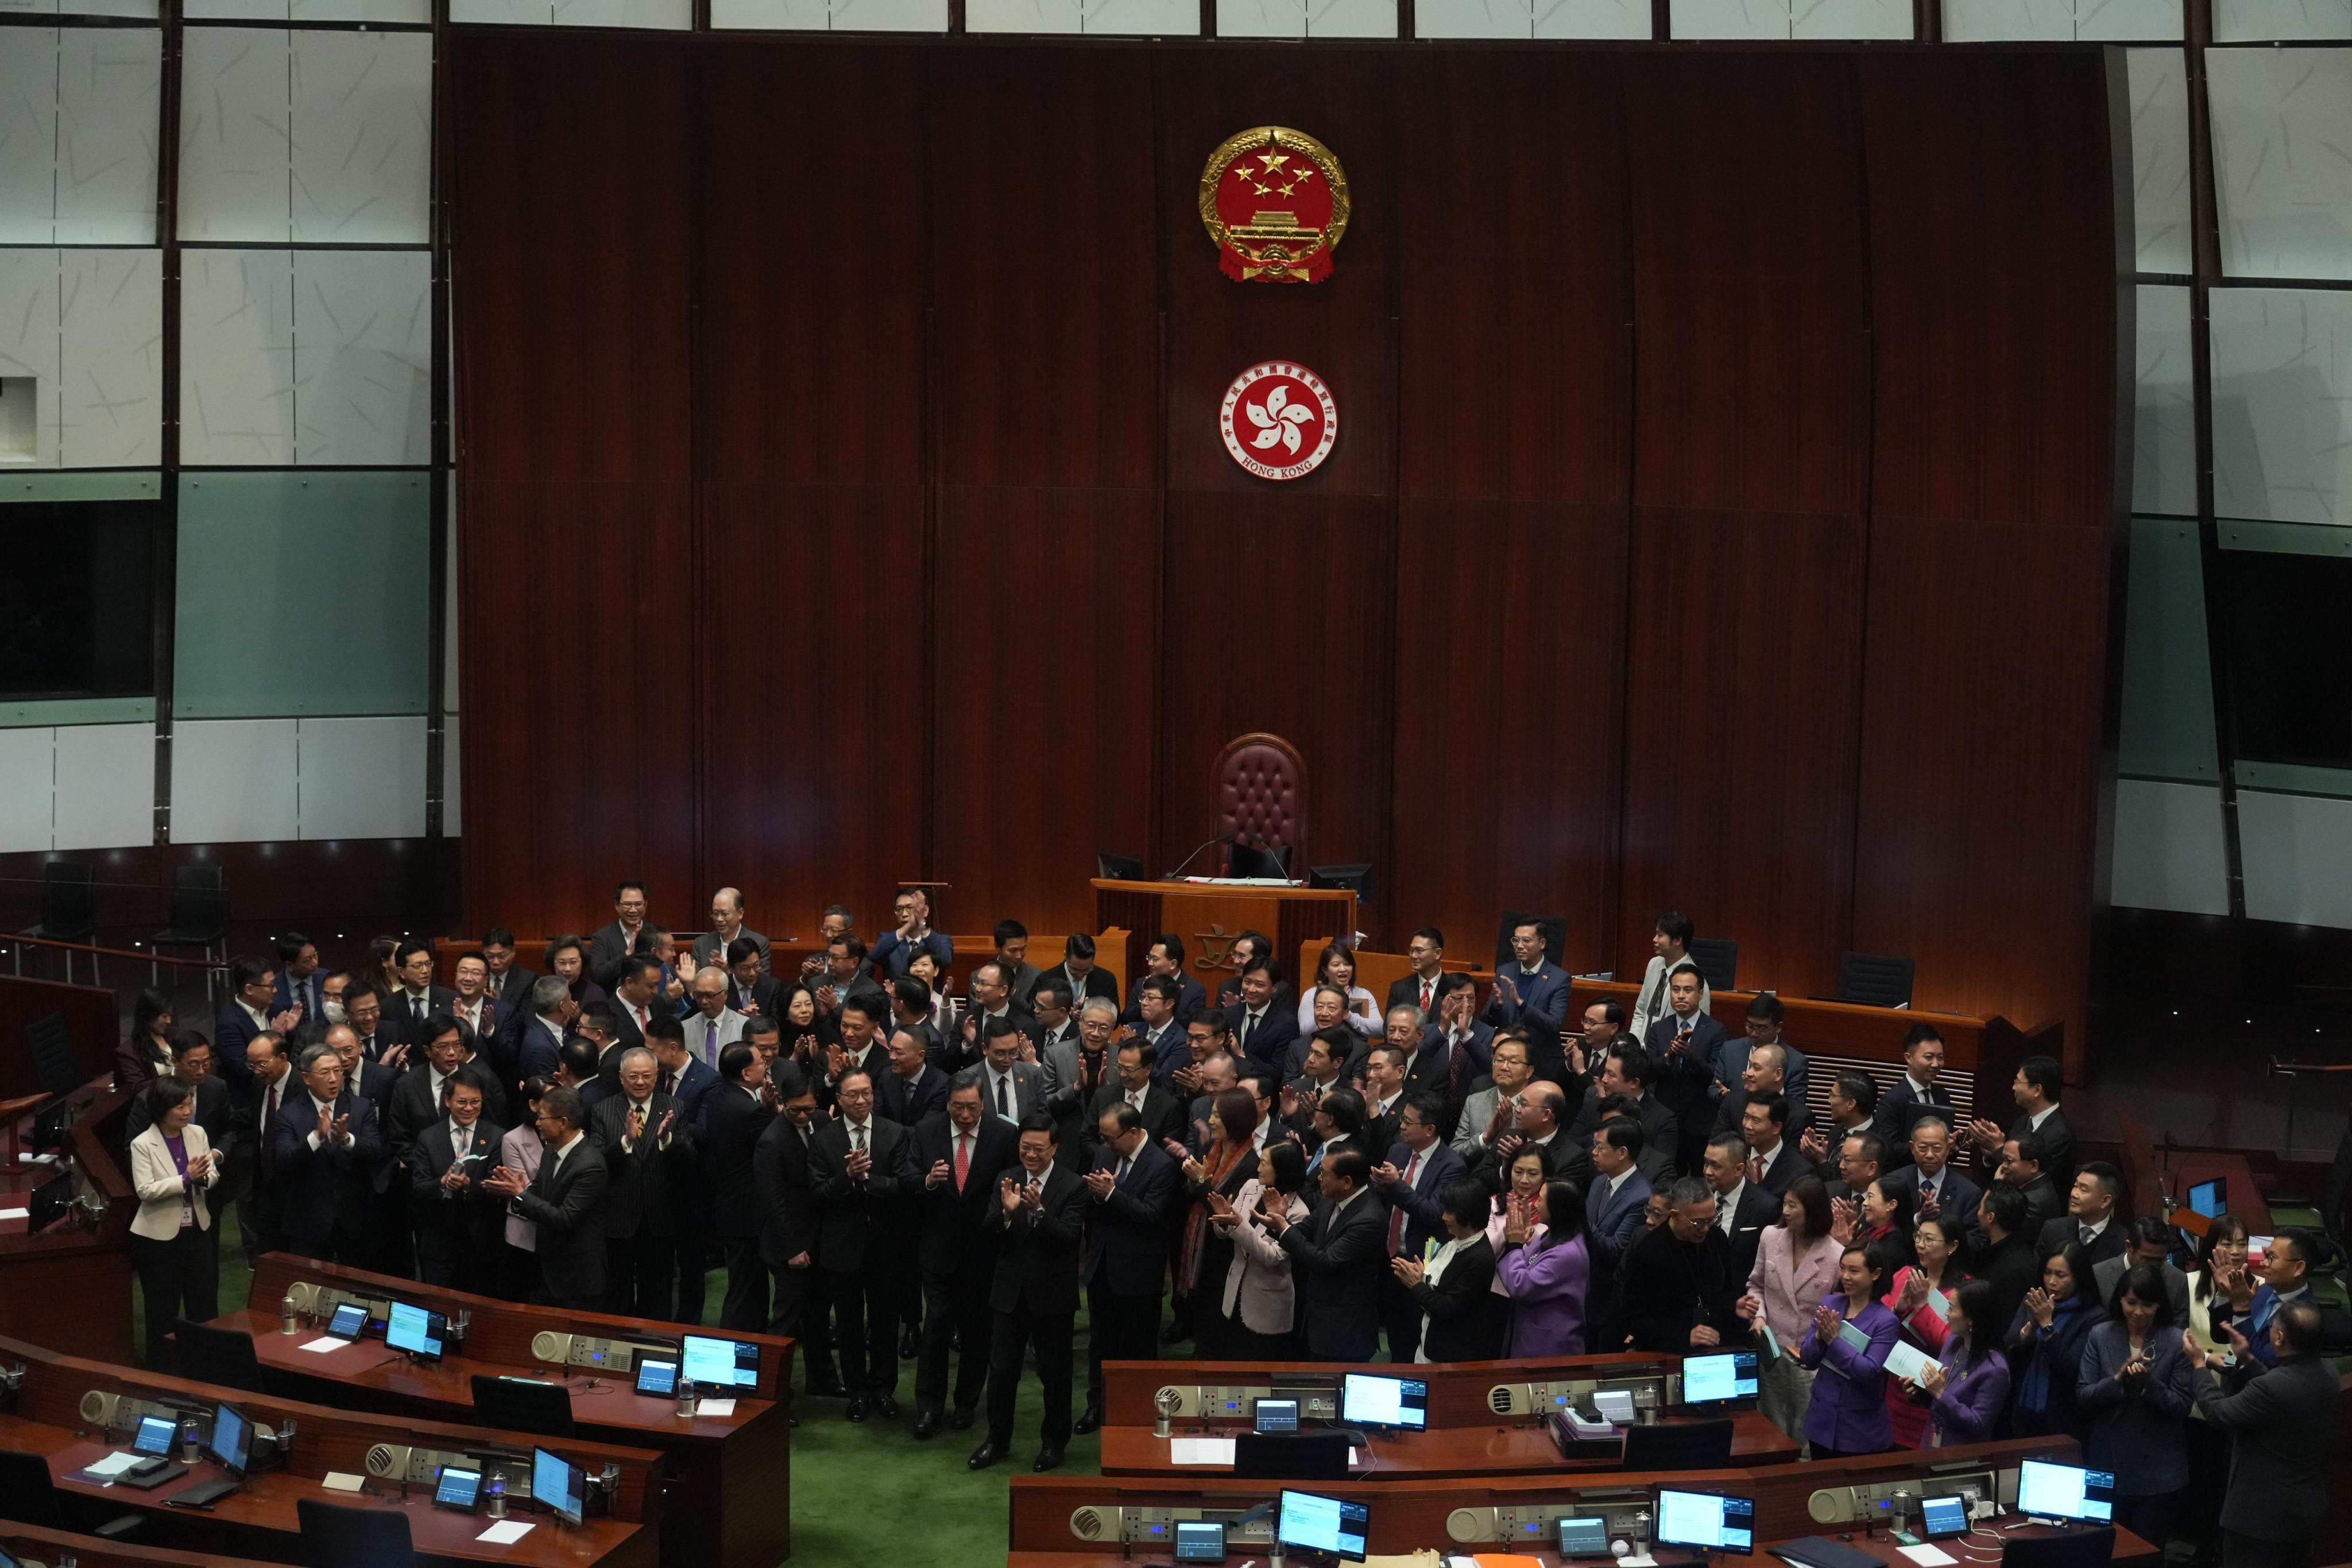 Legislators and the chief executive pose for photos after the historic passing of the Article 23 bill. The new law spans 39 offences divided into five categories. Photo: Sam Tsang